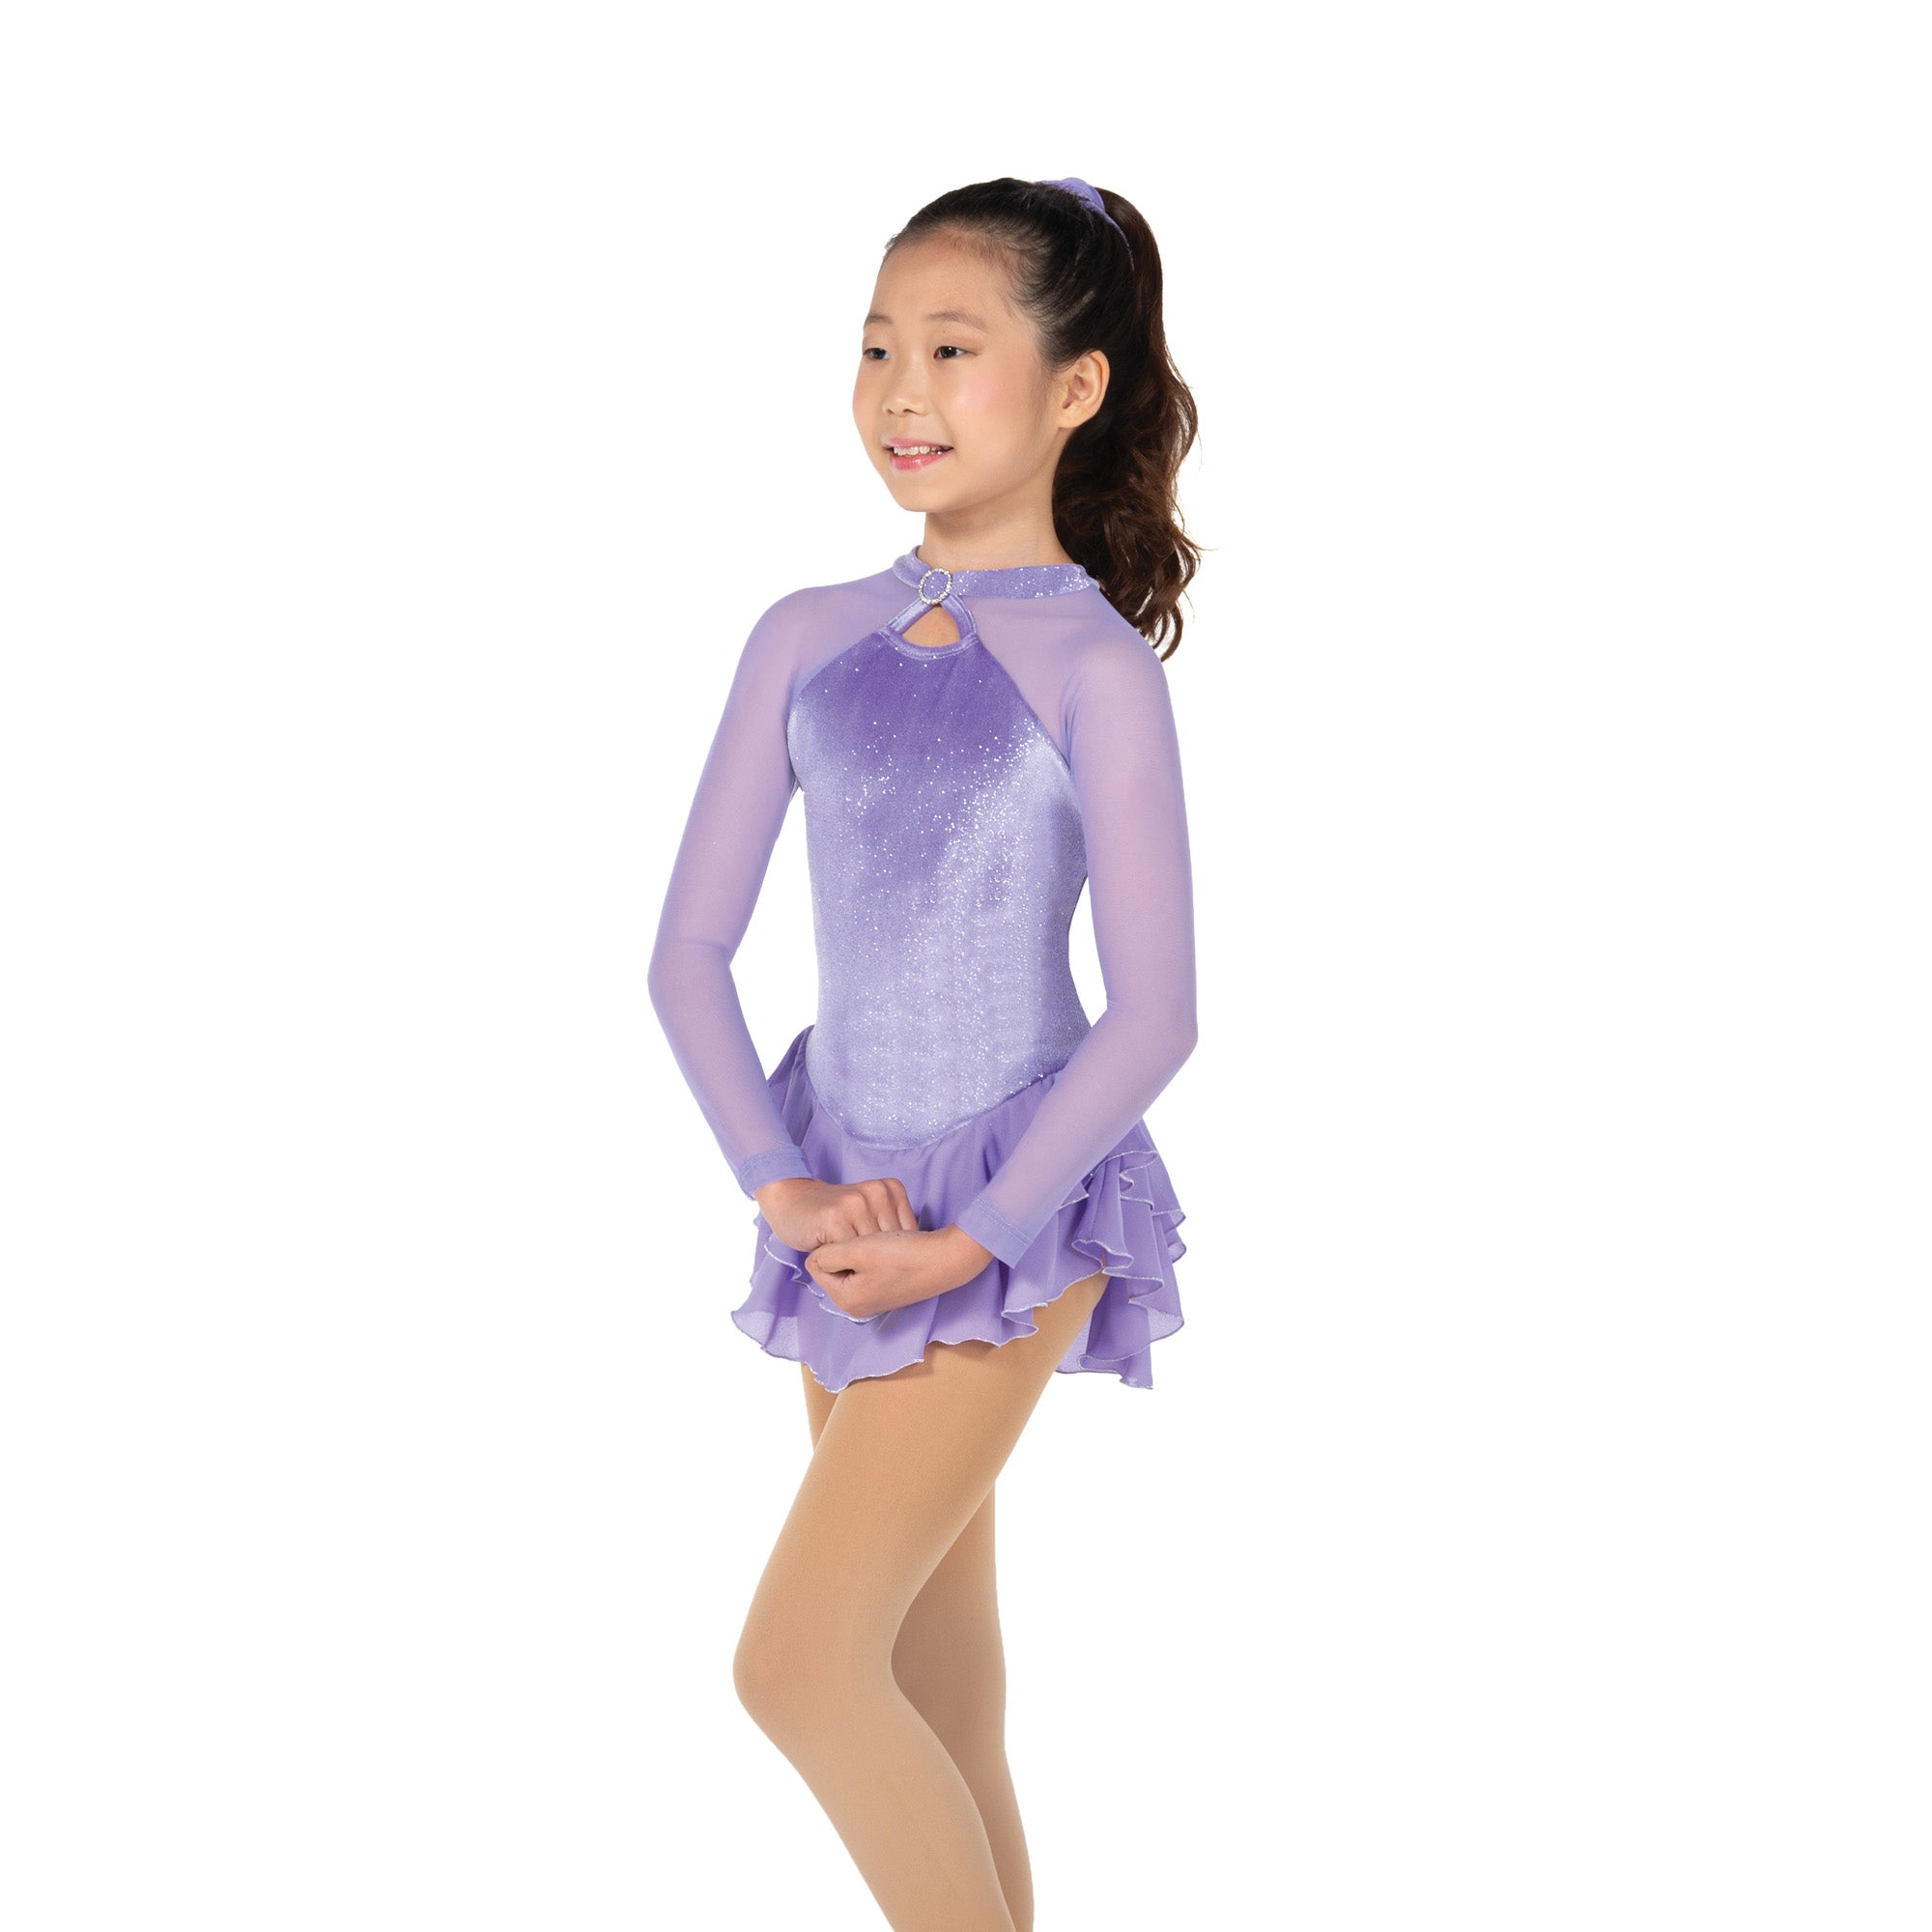 645 Shimmer Skating Dress in Lilac by Jerry's